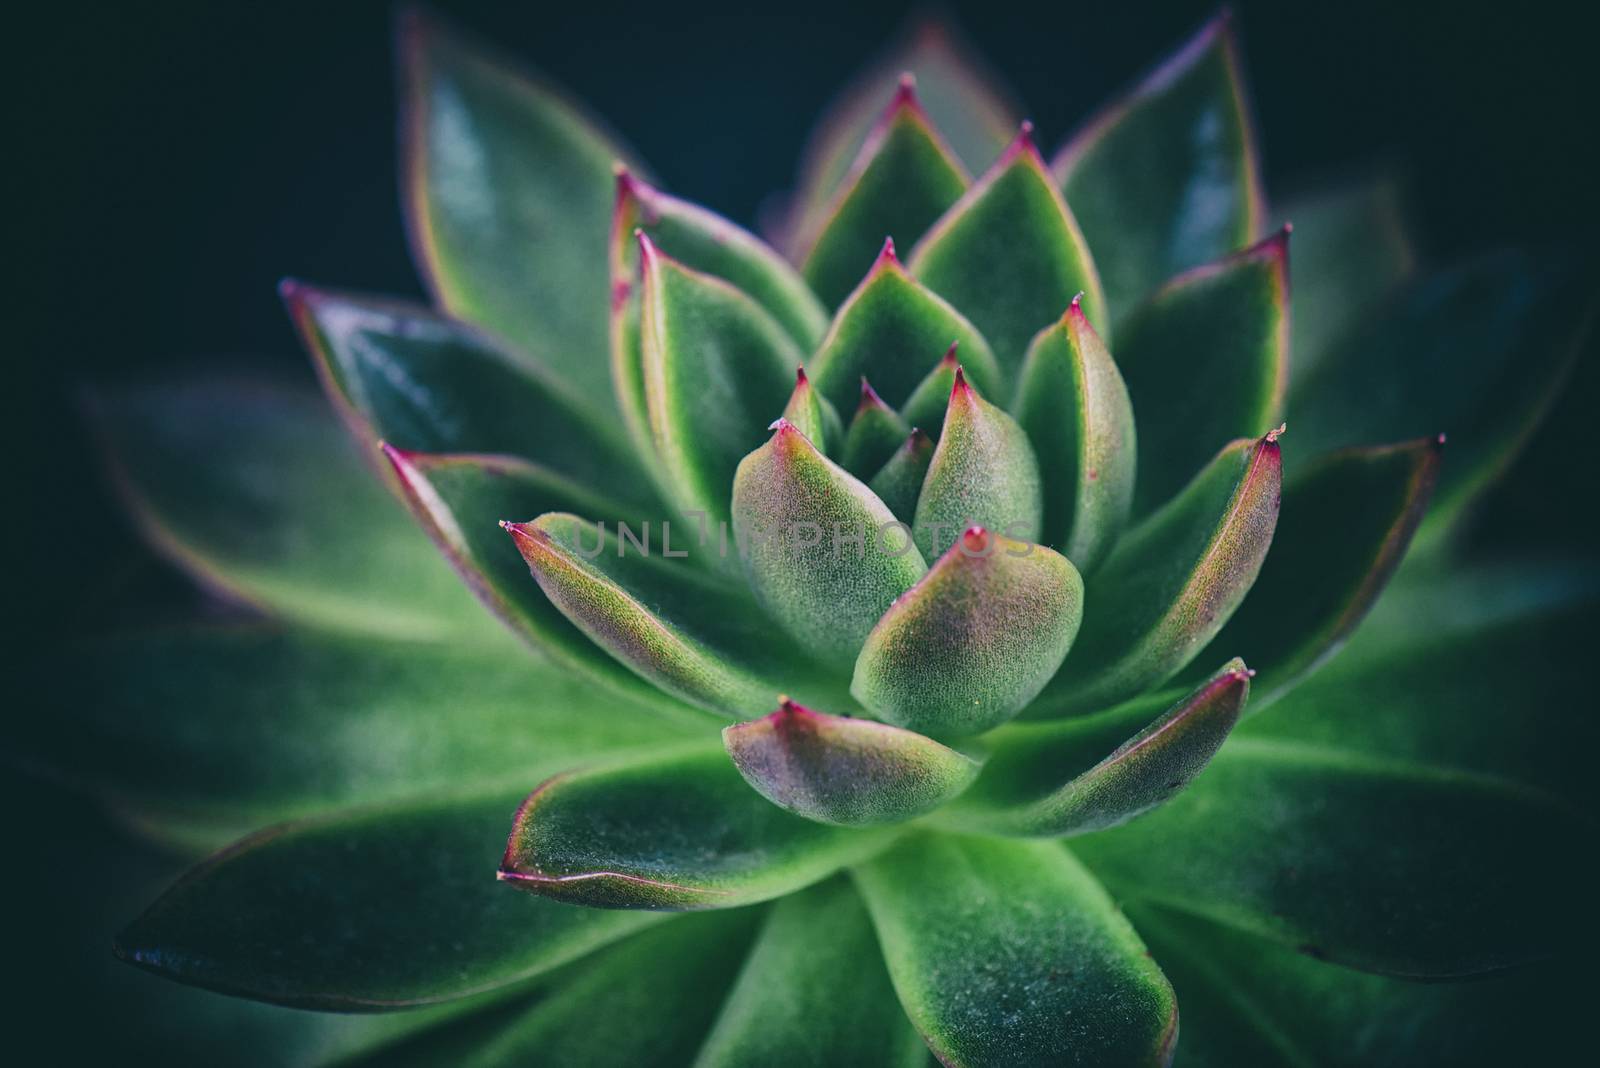 Succulent macro detail by rgbspace